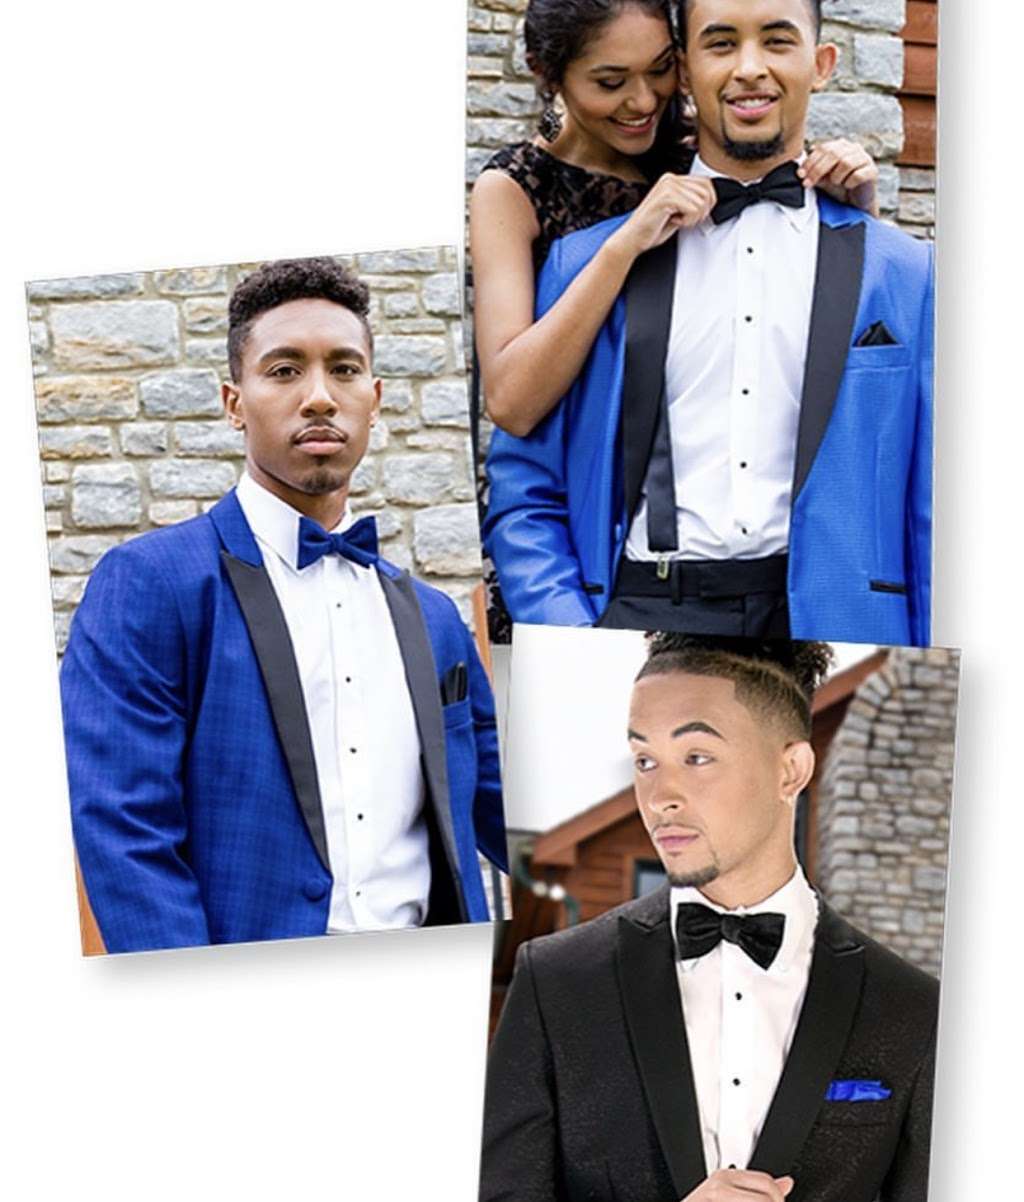 Menswear Unlimited | 339 W St Georges Ave 1st floor, Linden, NJ 07036, USA | Phone: (908) 486-0110